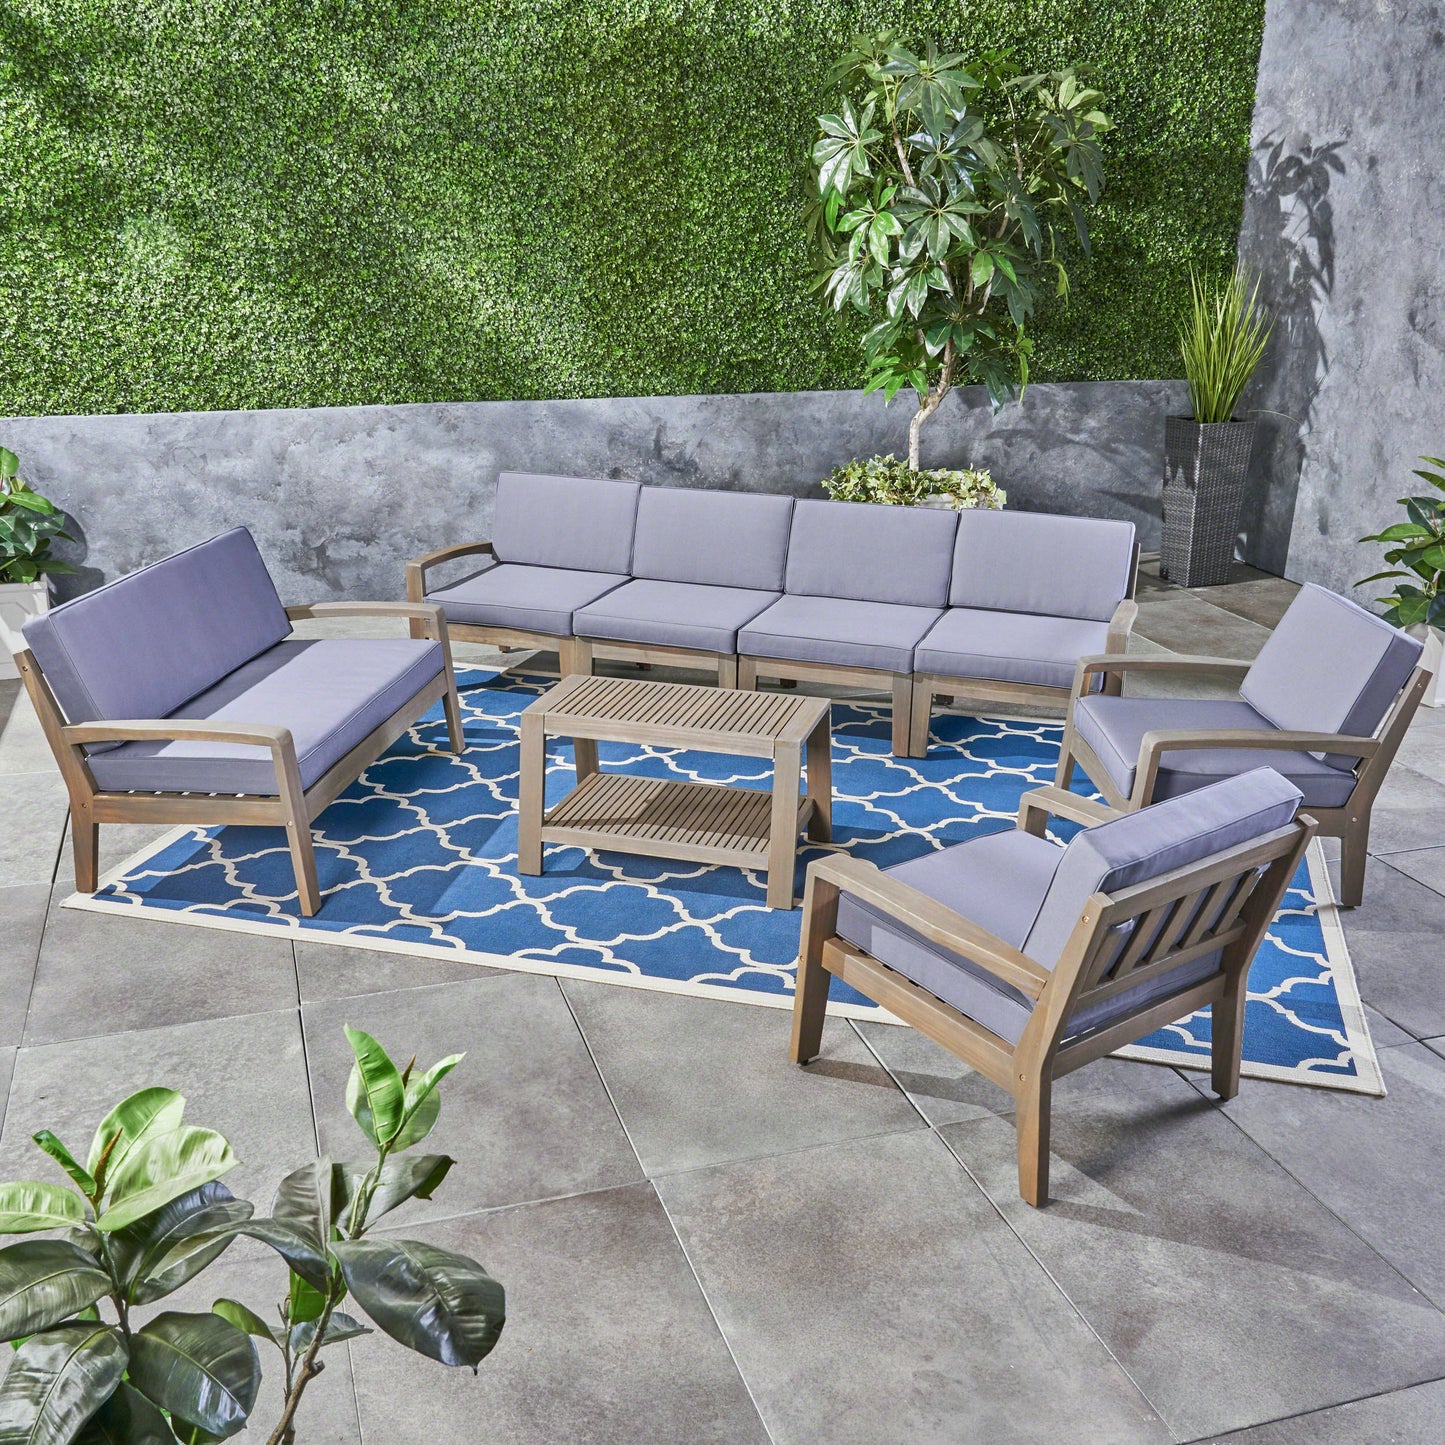 Giselle Outdoor Acacia Wood 8 Seater Sectional Chat Set with Coffee Table